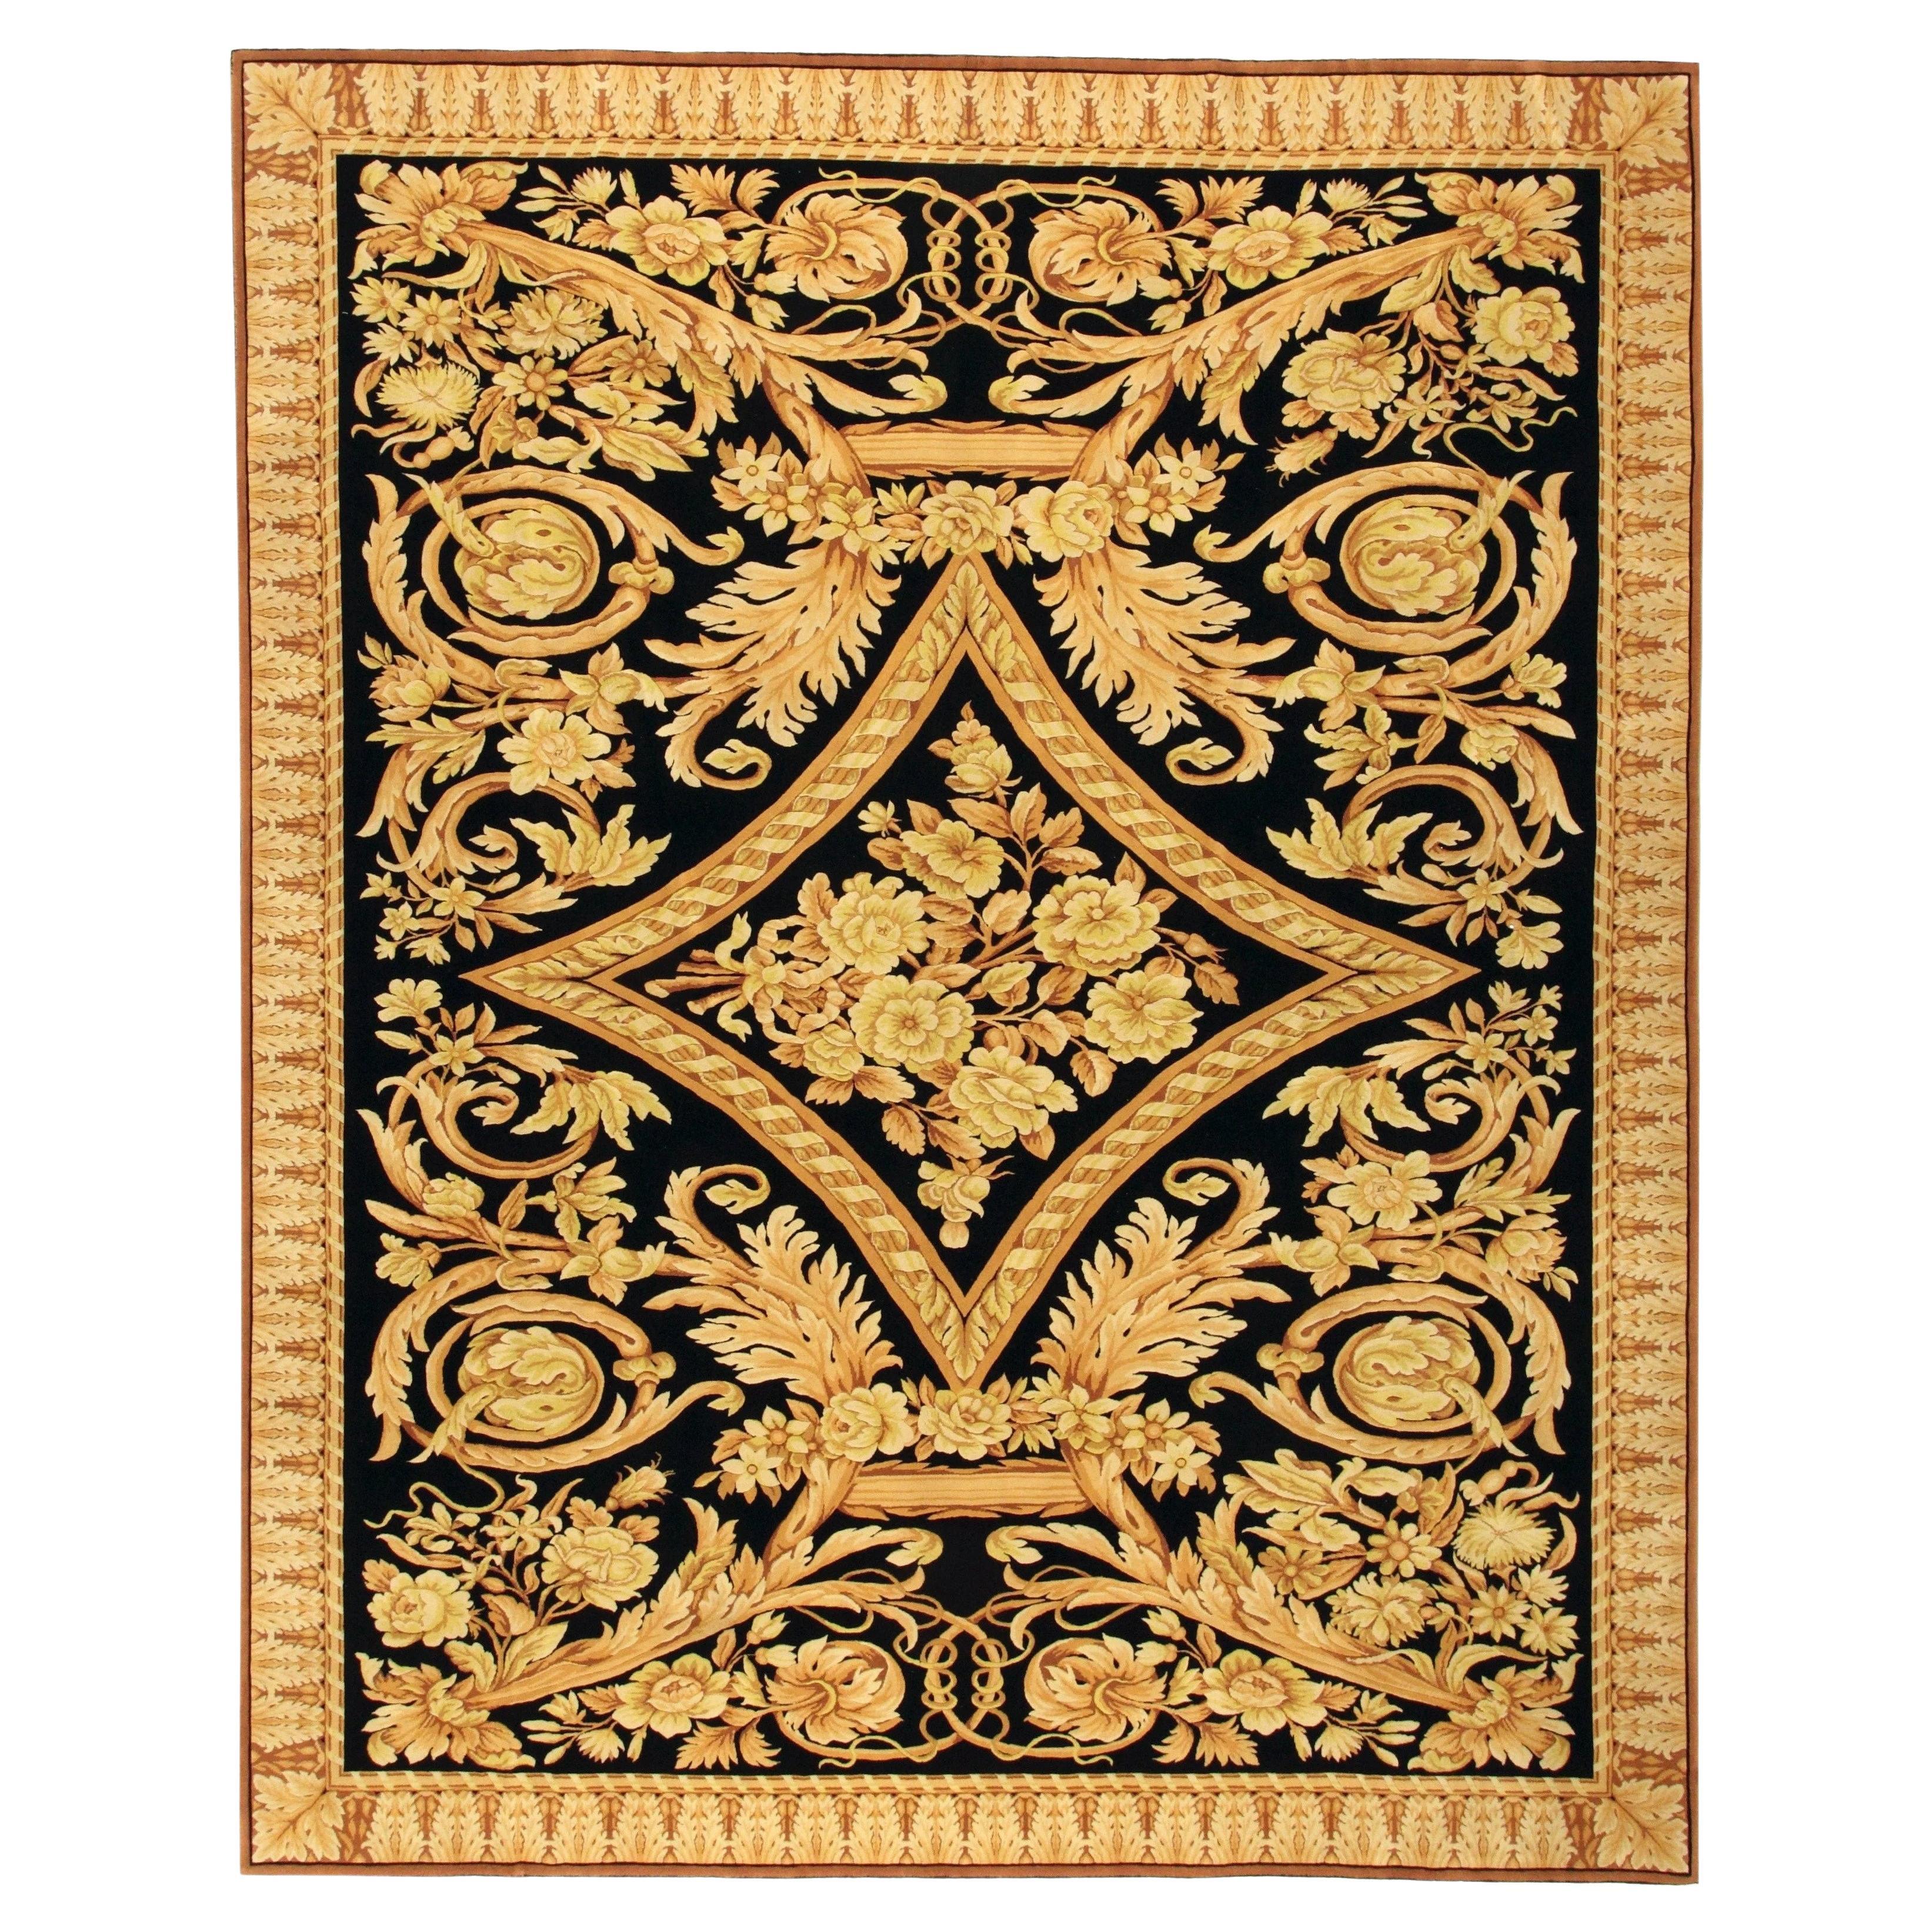 VIA COMO 'Barocco' Hand Knotted Fine Wool Rug 8x10 ft RARE Extra Fine Gold/Black For Sale